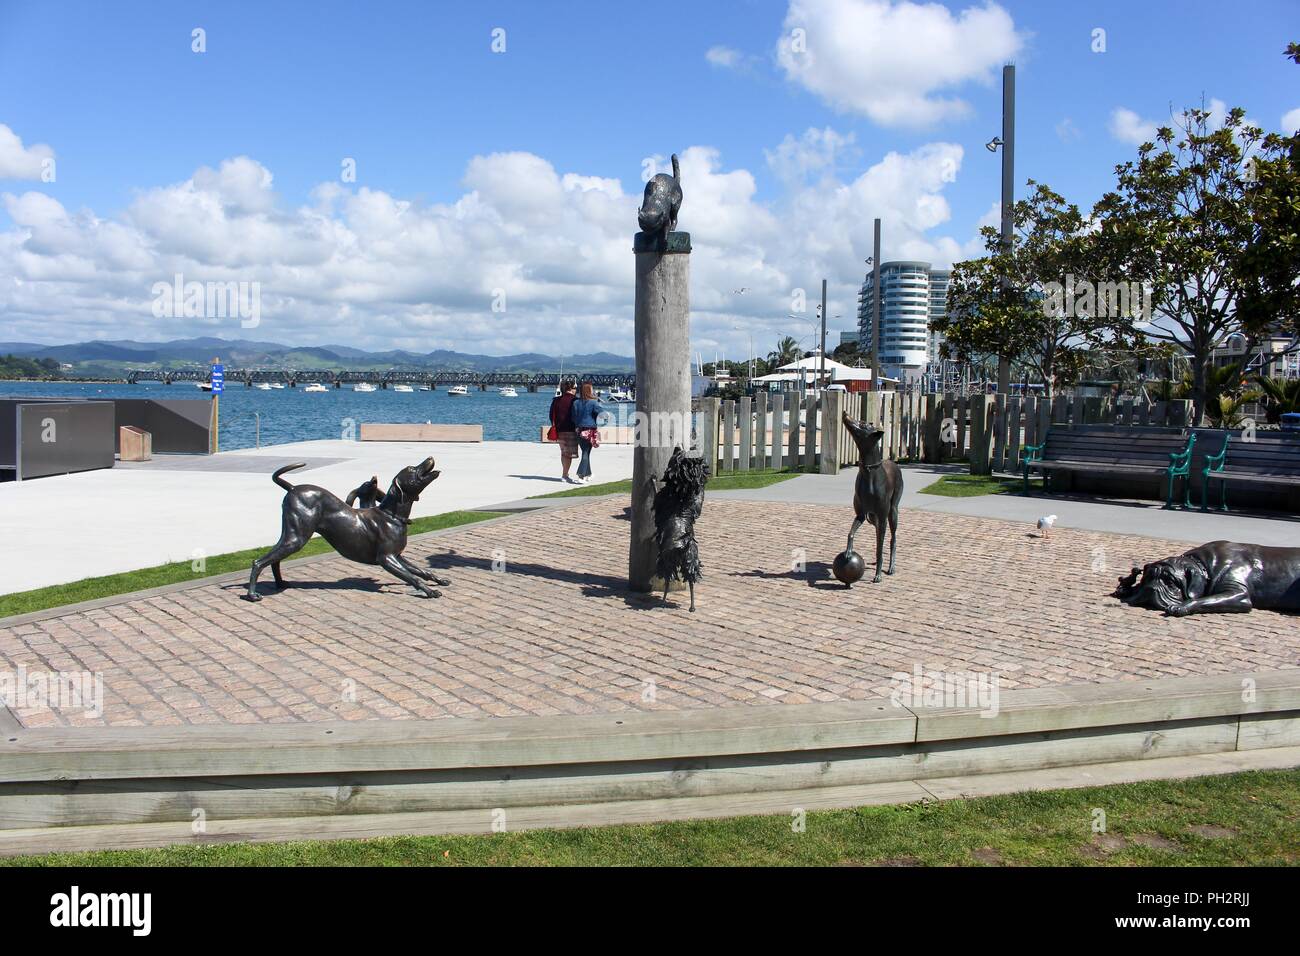 Dogs chasing a cat bronze statue on Tauranga waterfront, North Island, New Zealand, October 30, 2017. () Stock Photo